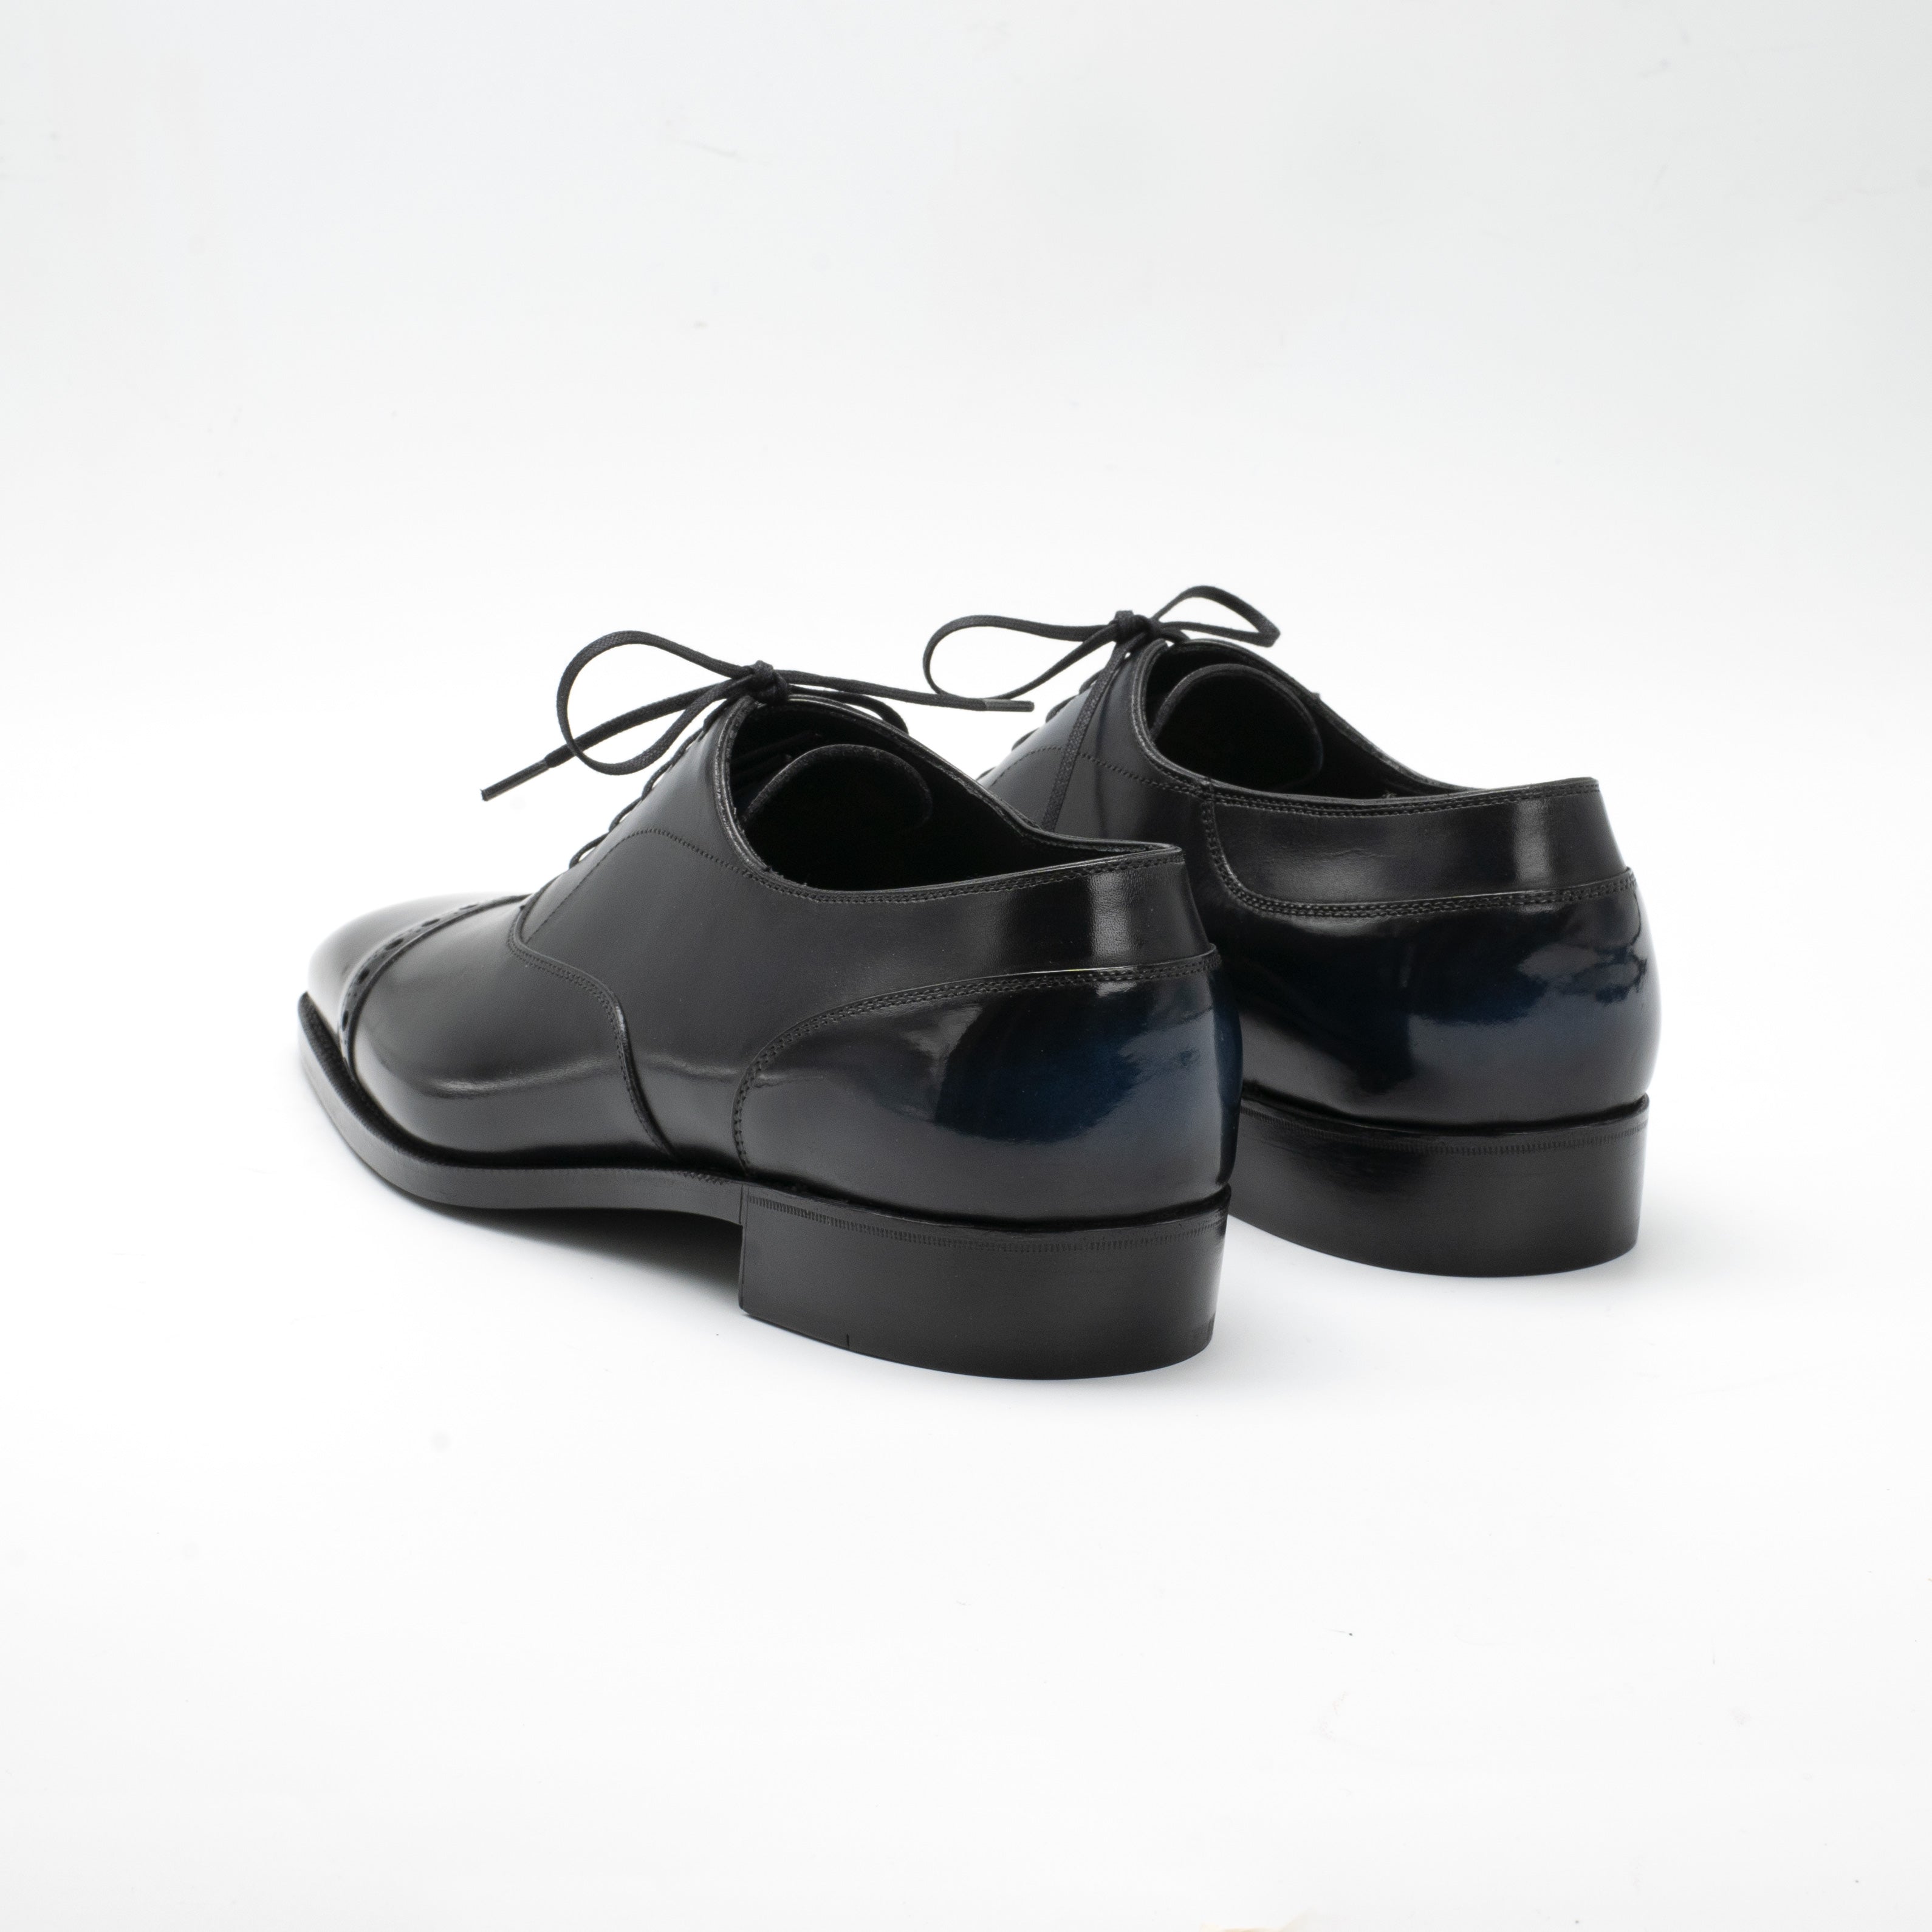 Mario Cap Toe Oxford Shoe by Norman Vilalta Men's Goodyear-welted Shoes in Barcelona, Spain